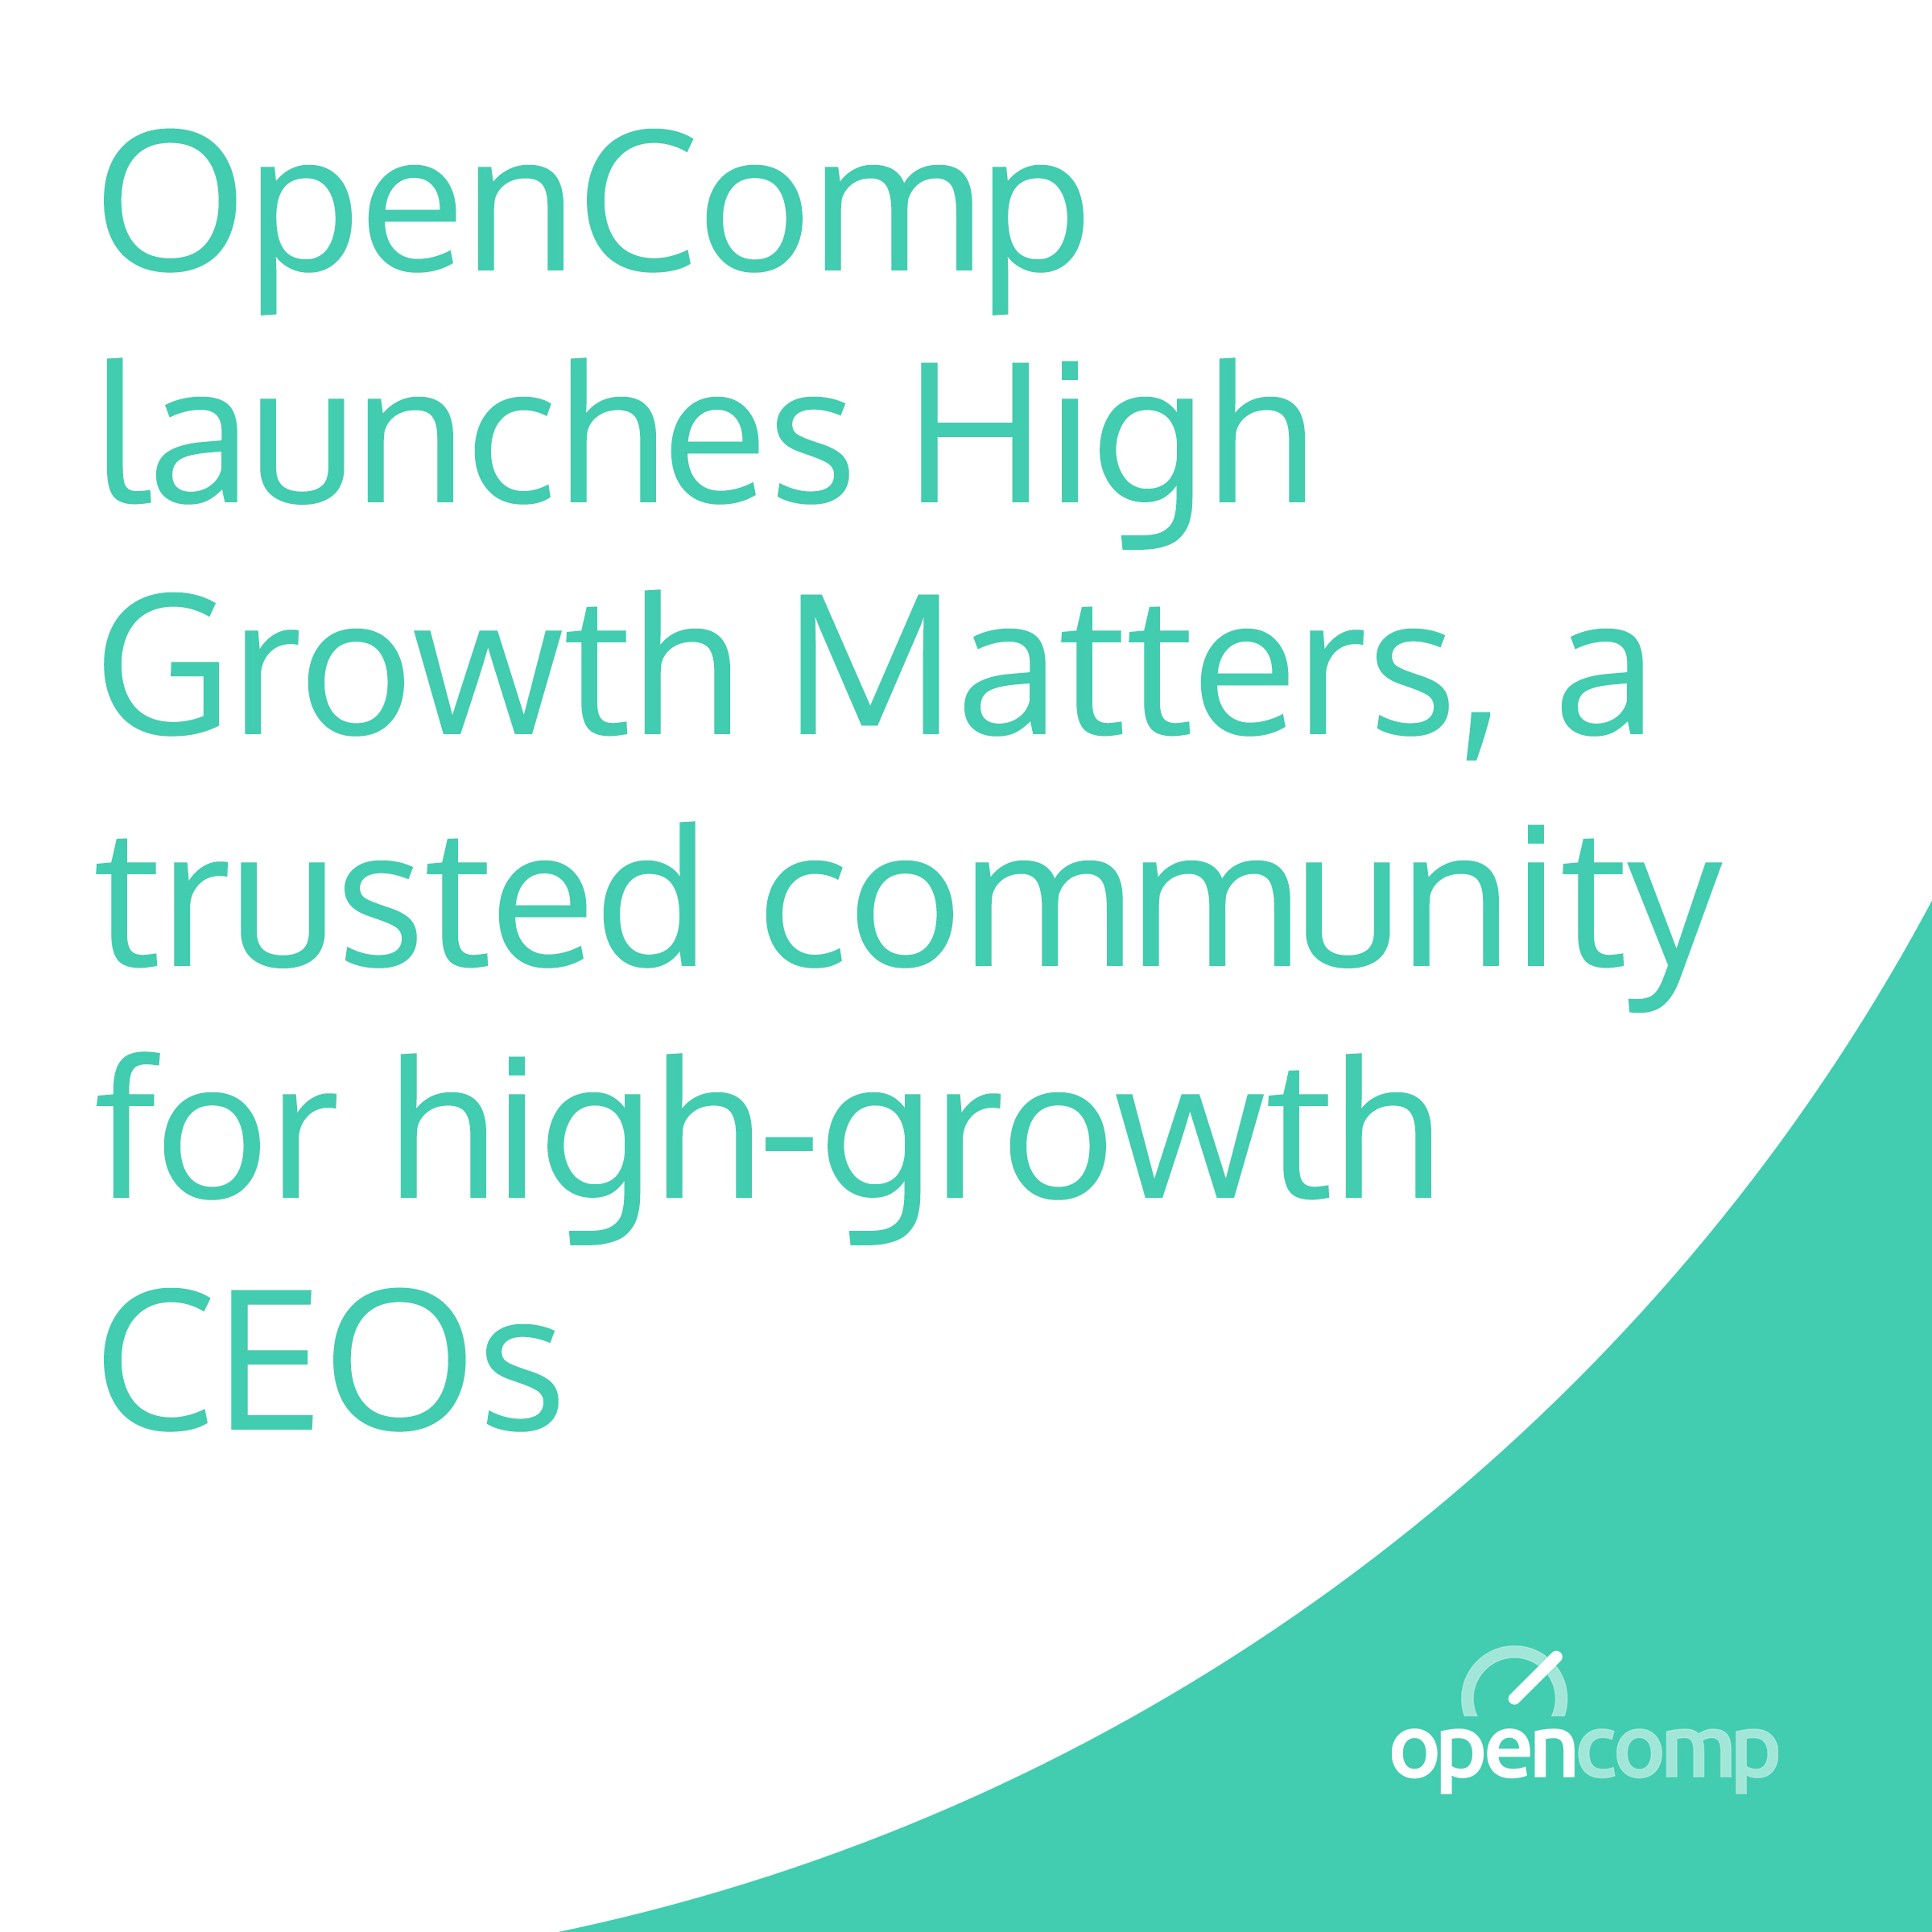 OpenComp Launches High Growth Matters Community for Founders & CEOs